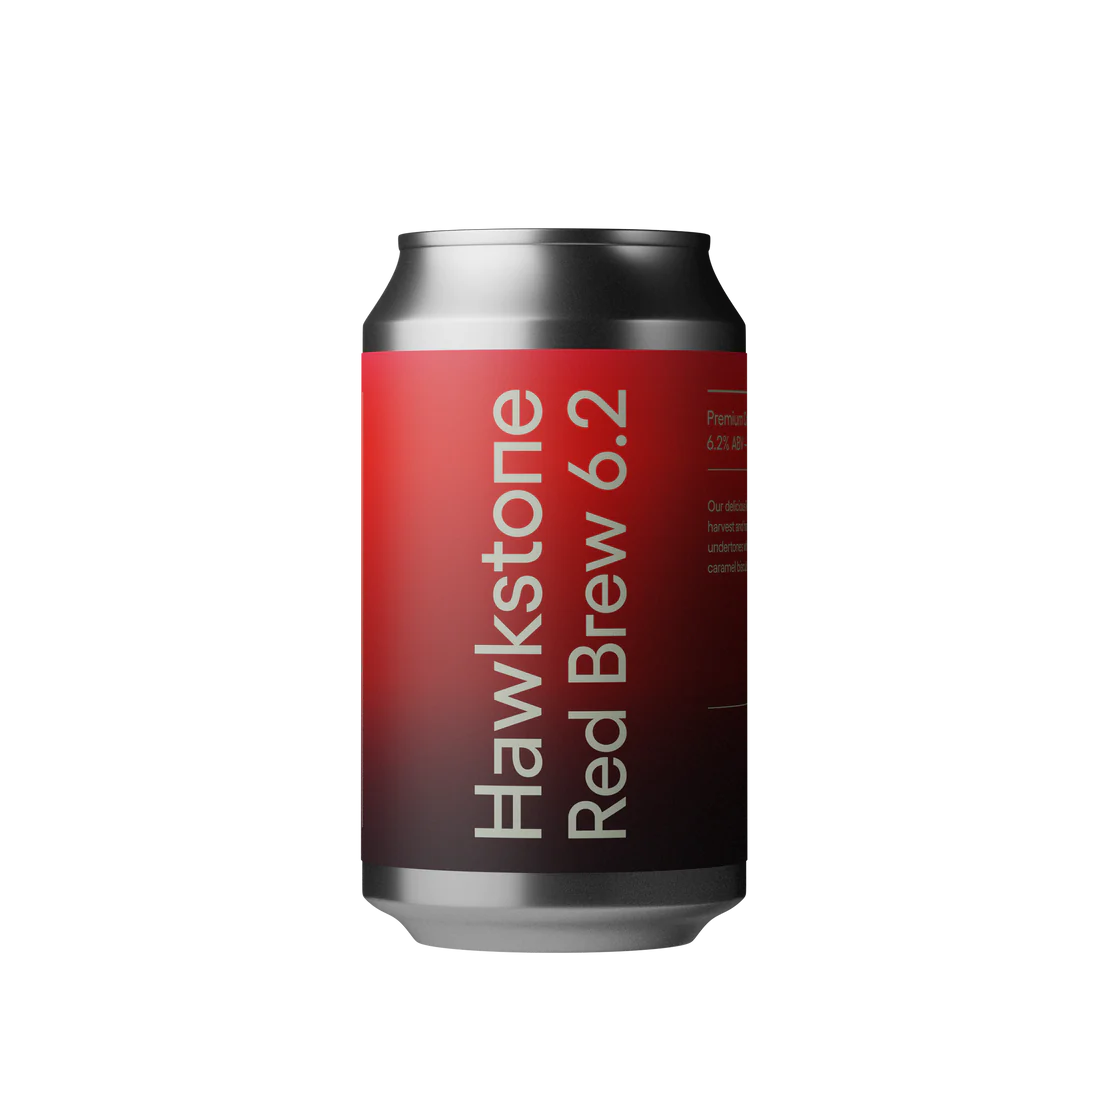 Hawkstone Redbrew Lager ( The Red One) Pack of 12 cans